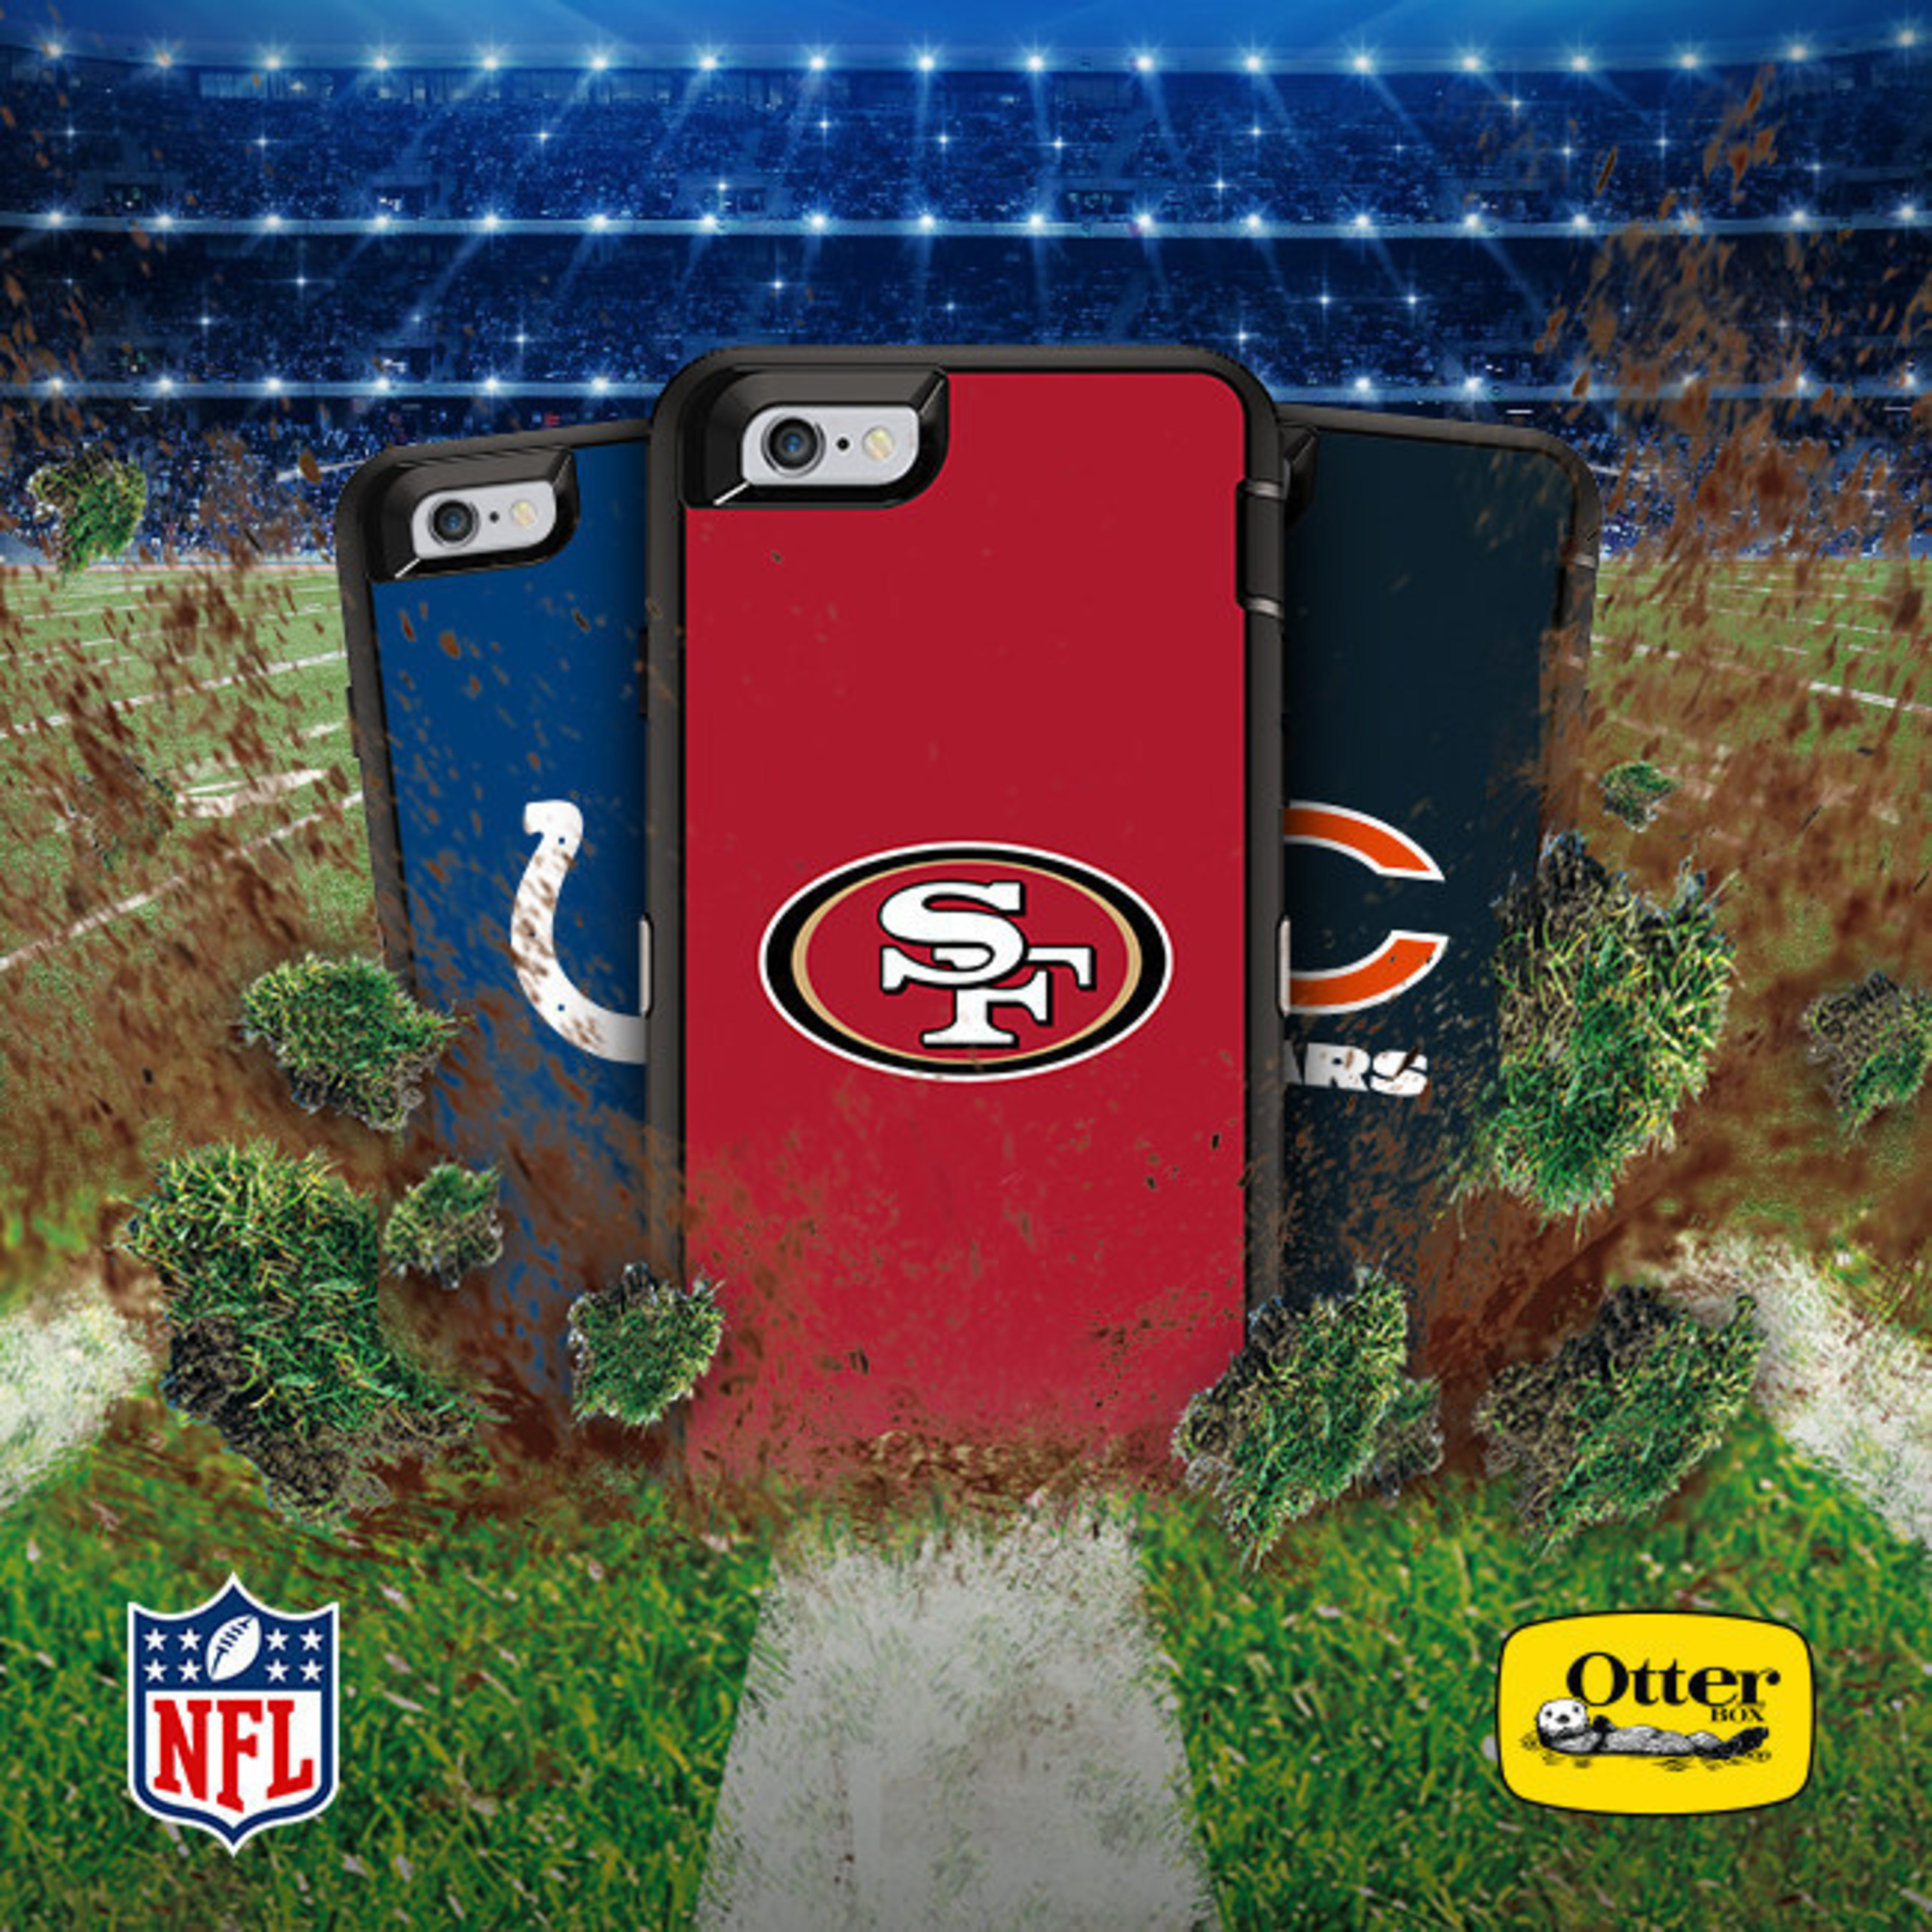 OtterBox, the No.1-most trusted brand for smartphone protection, announces Defender Series cases featuring all 32 NFL team logos are available now.